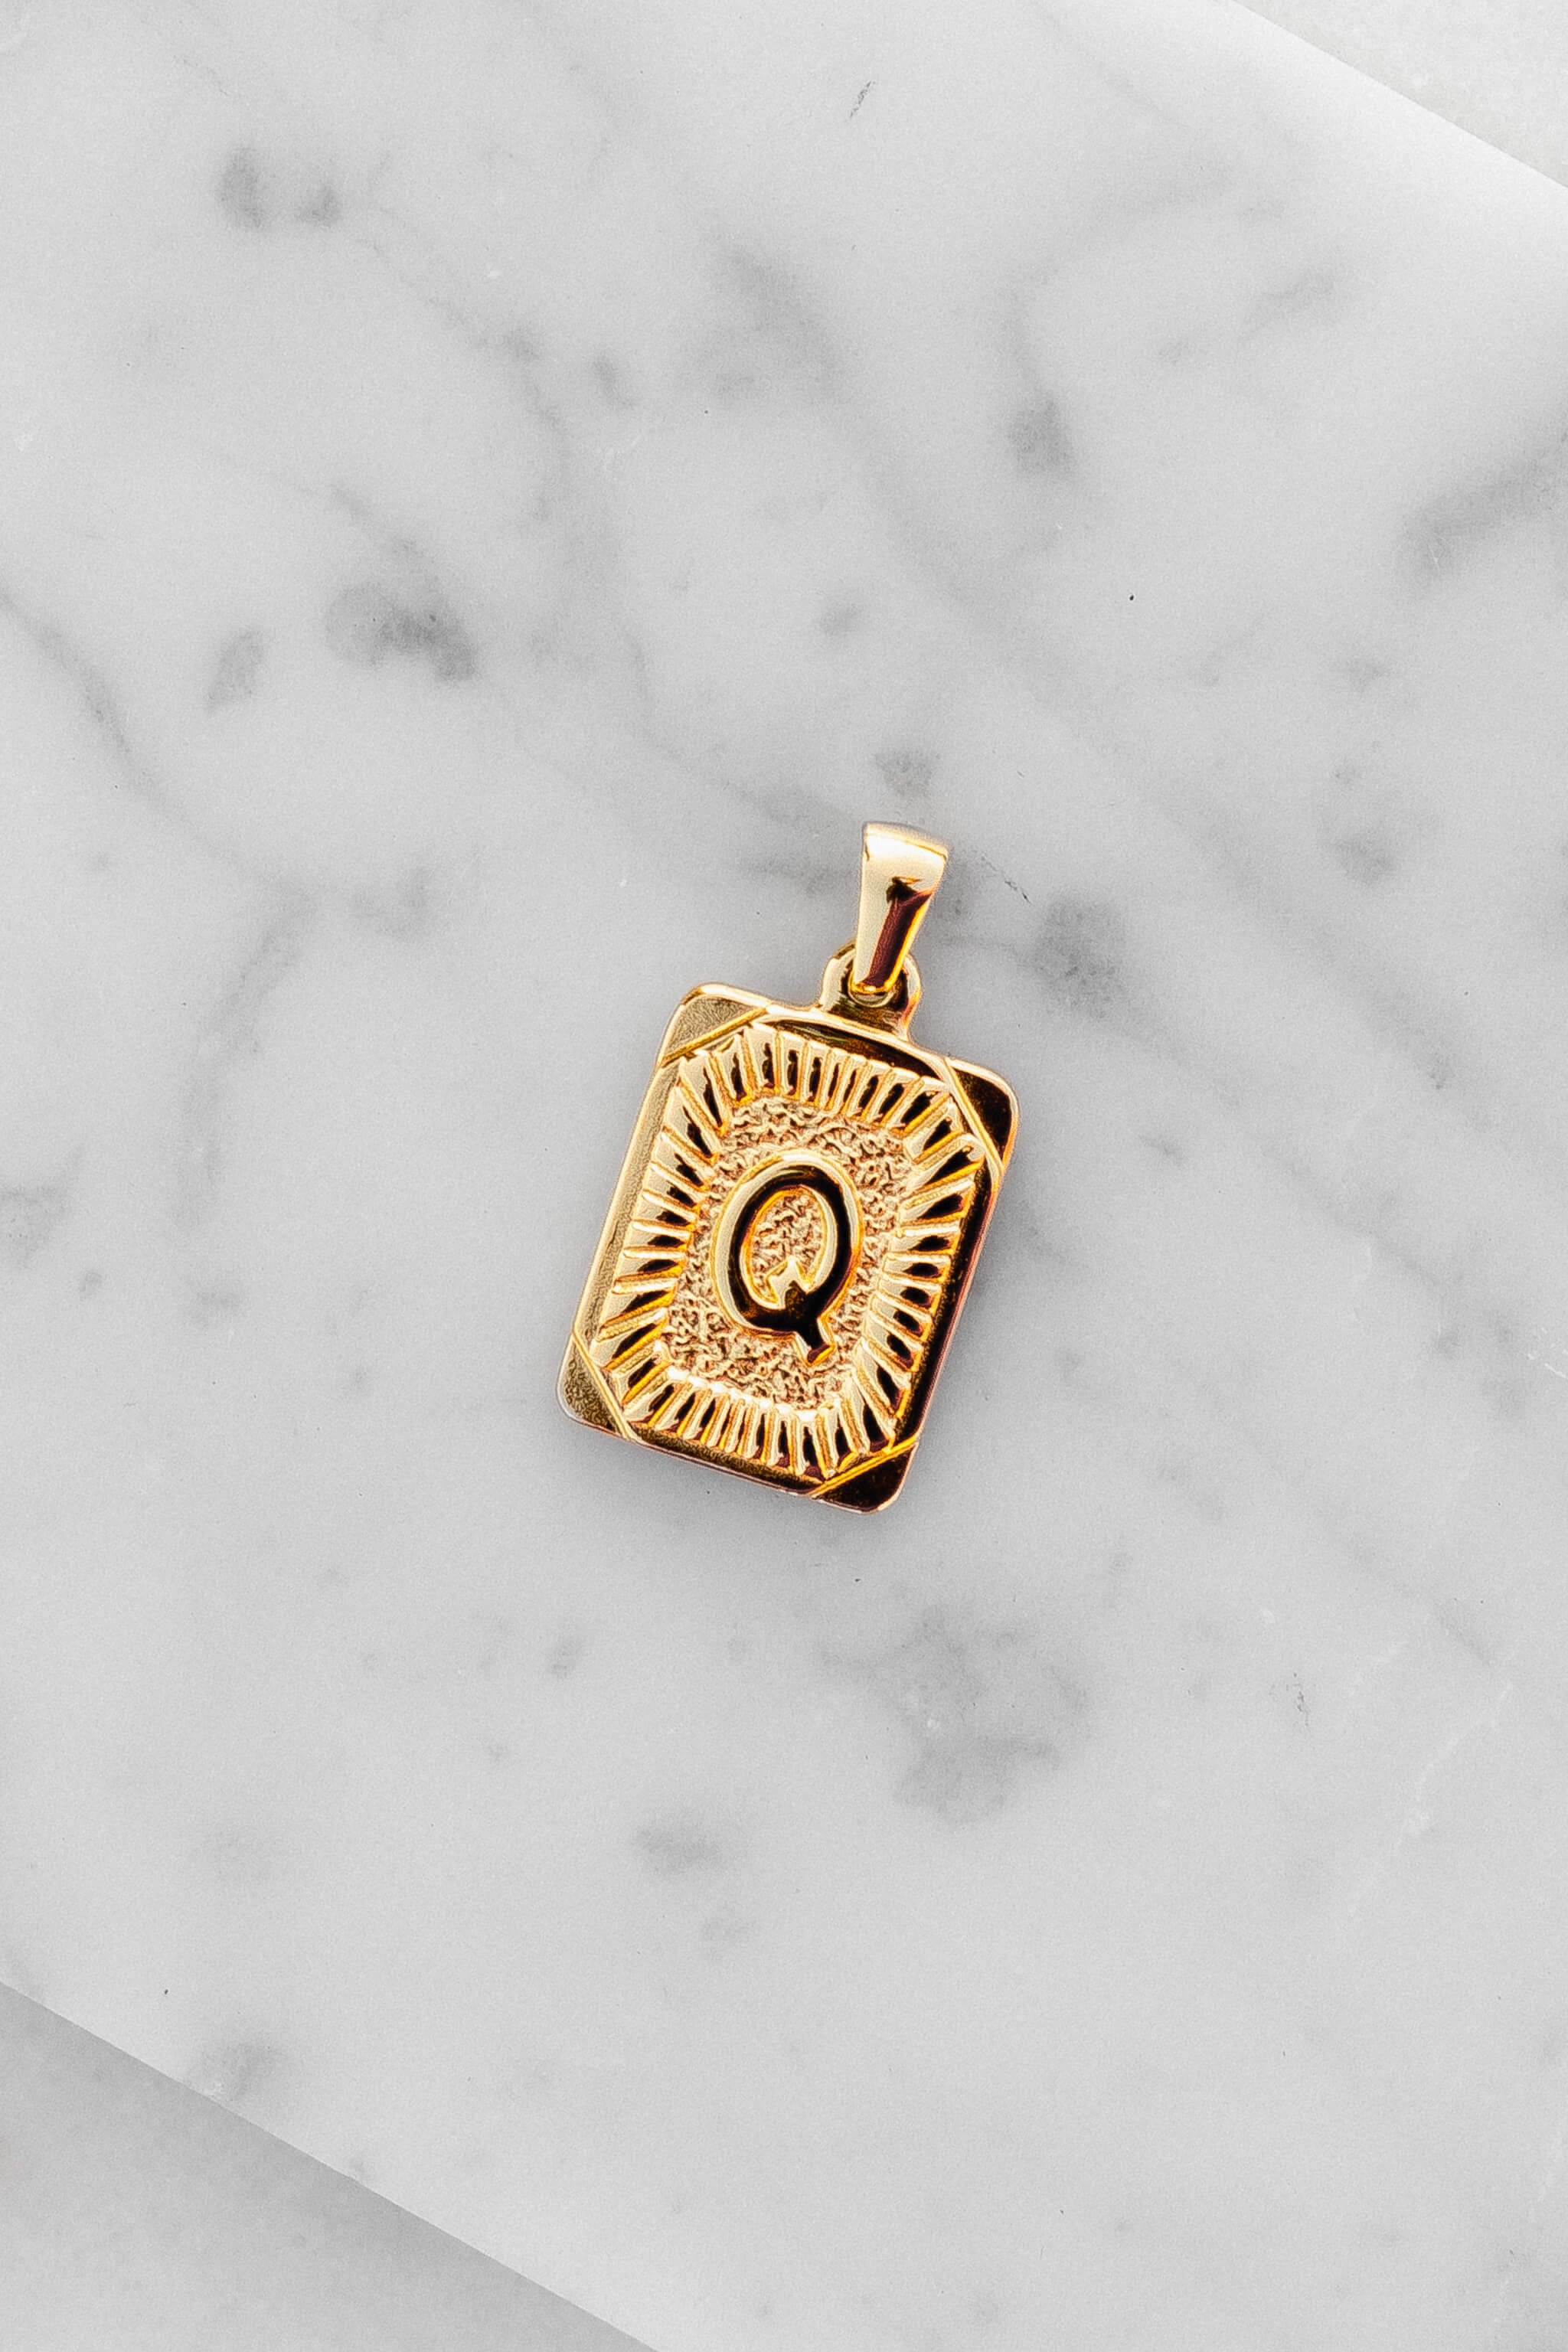 Gold Monogram Letter "Q" Charm laying on a marble